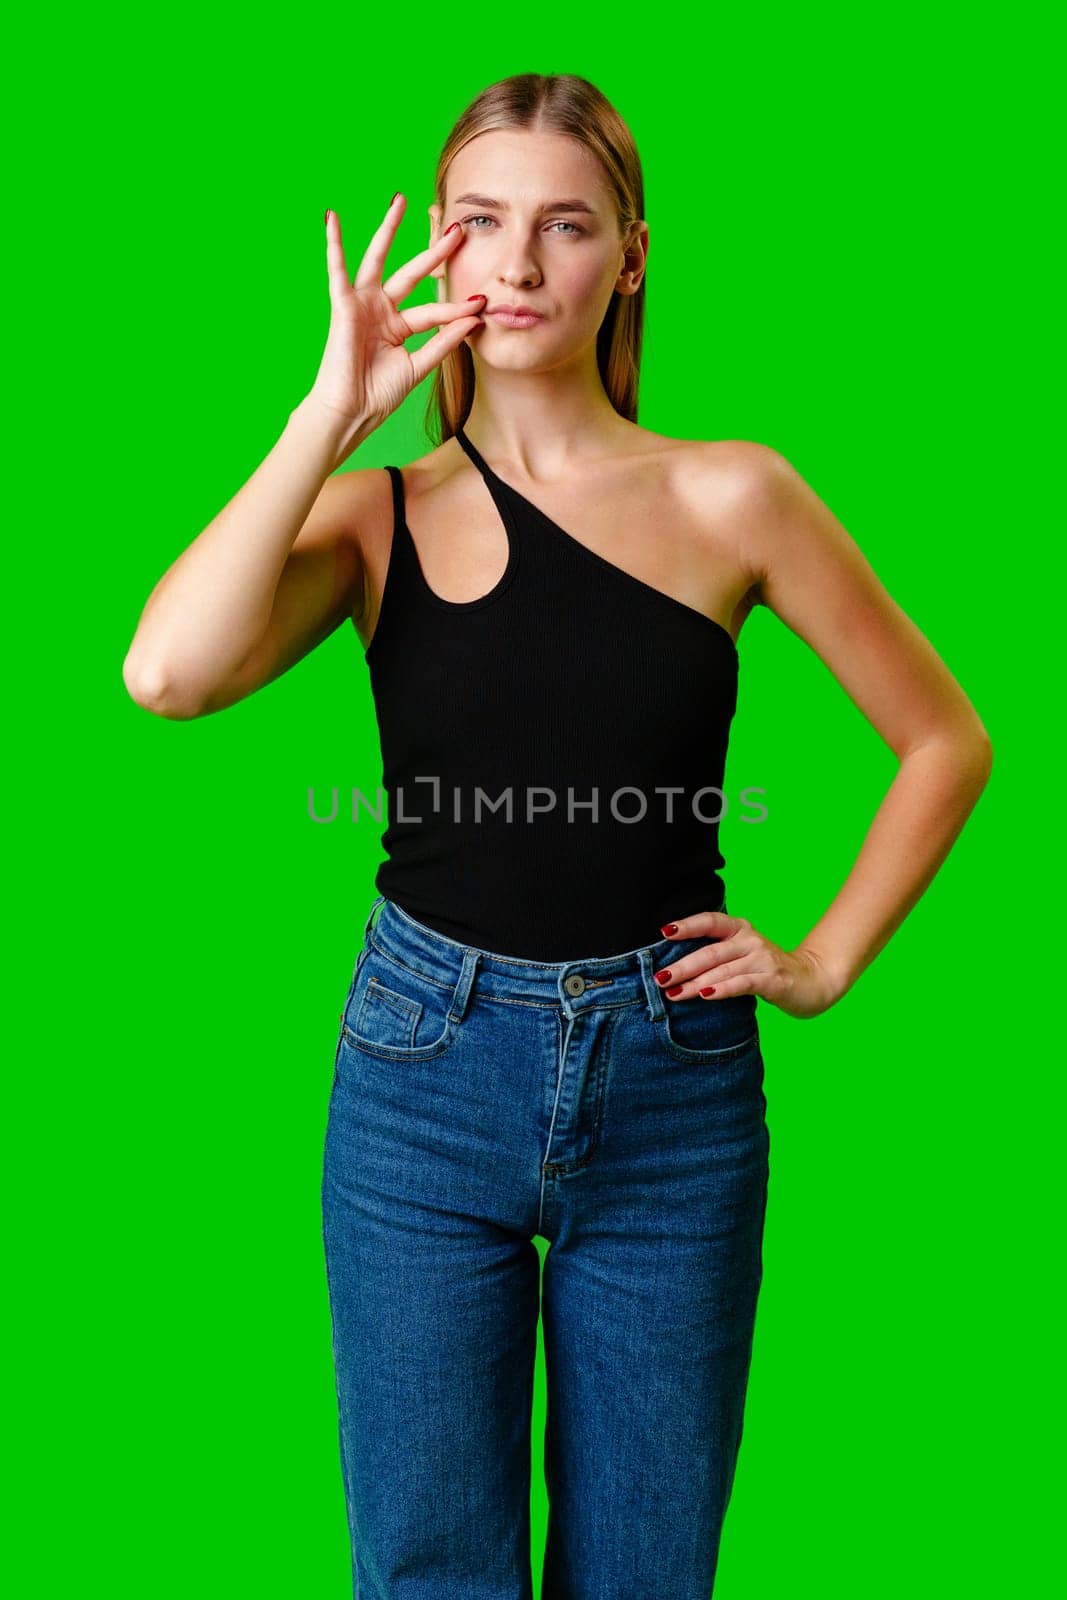 Young Woman Gesturing Silence With Finger on Lips Against Green Screen Background by Fabrikasimf